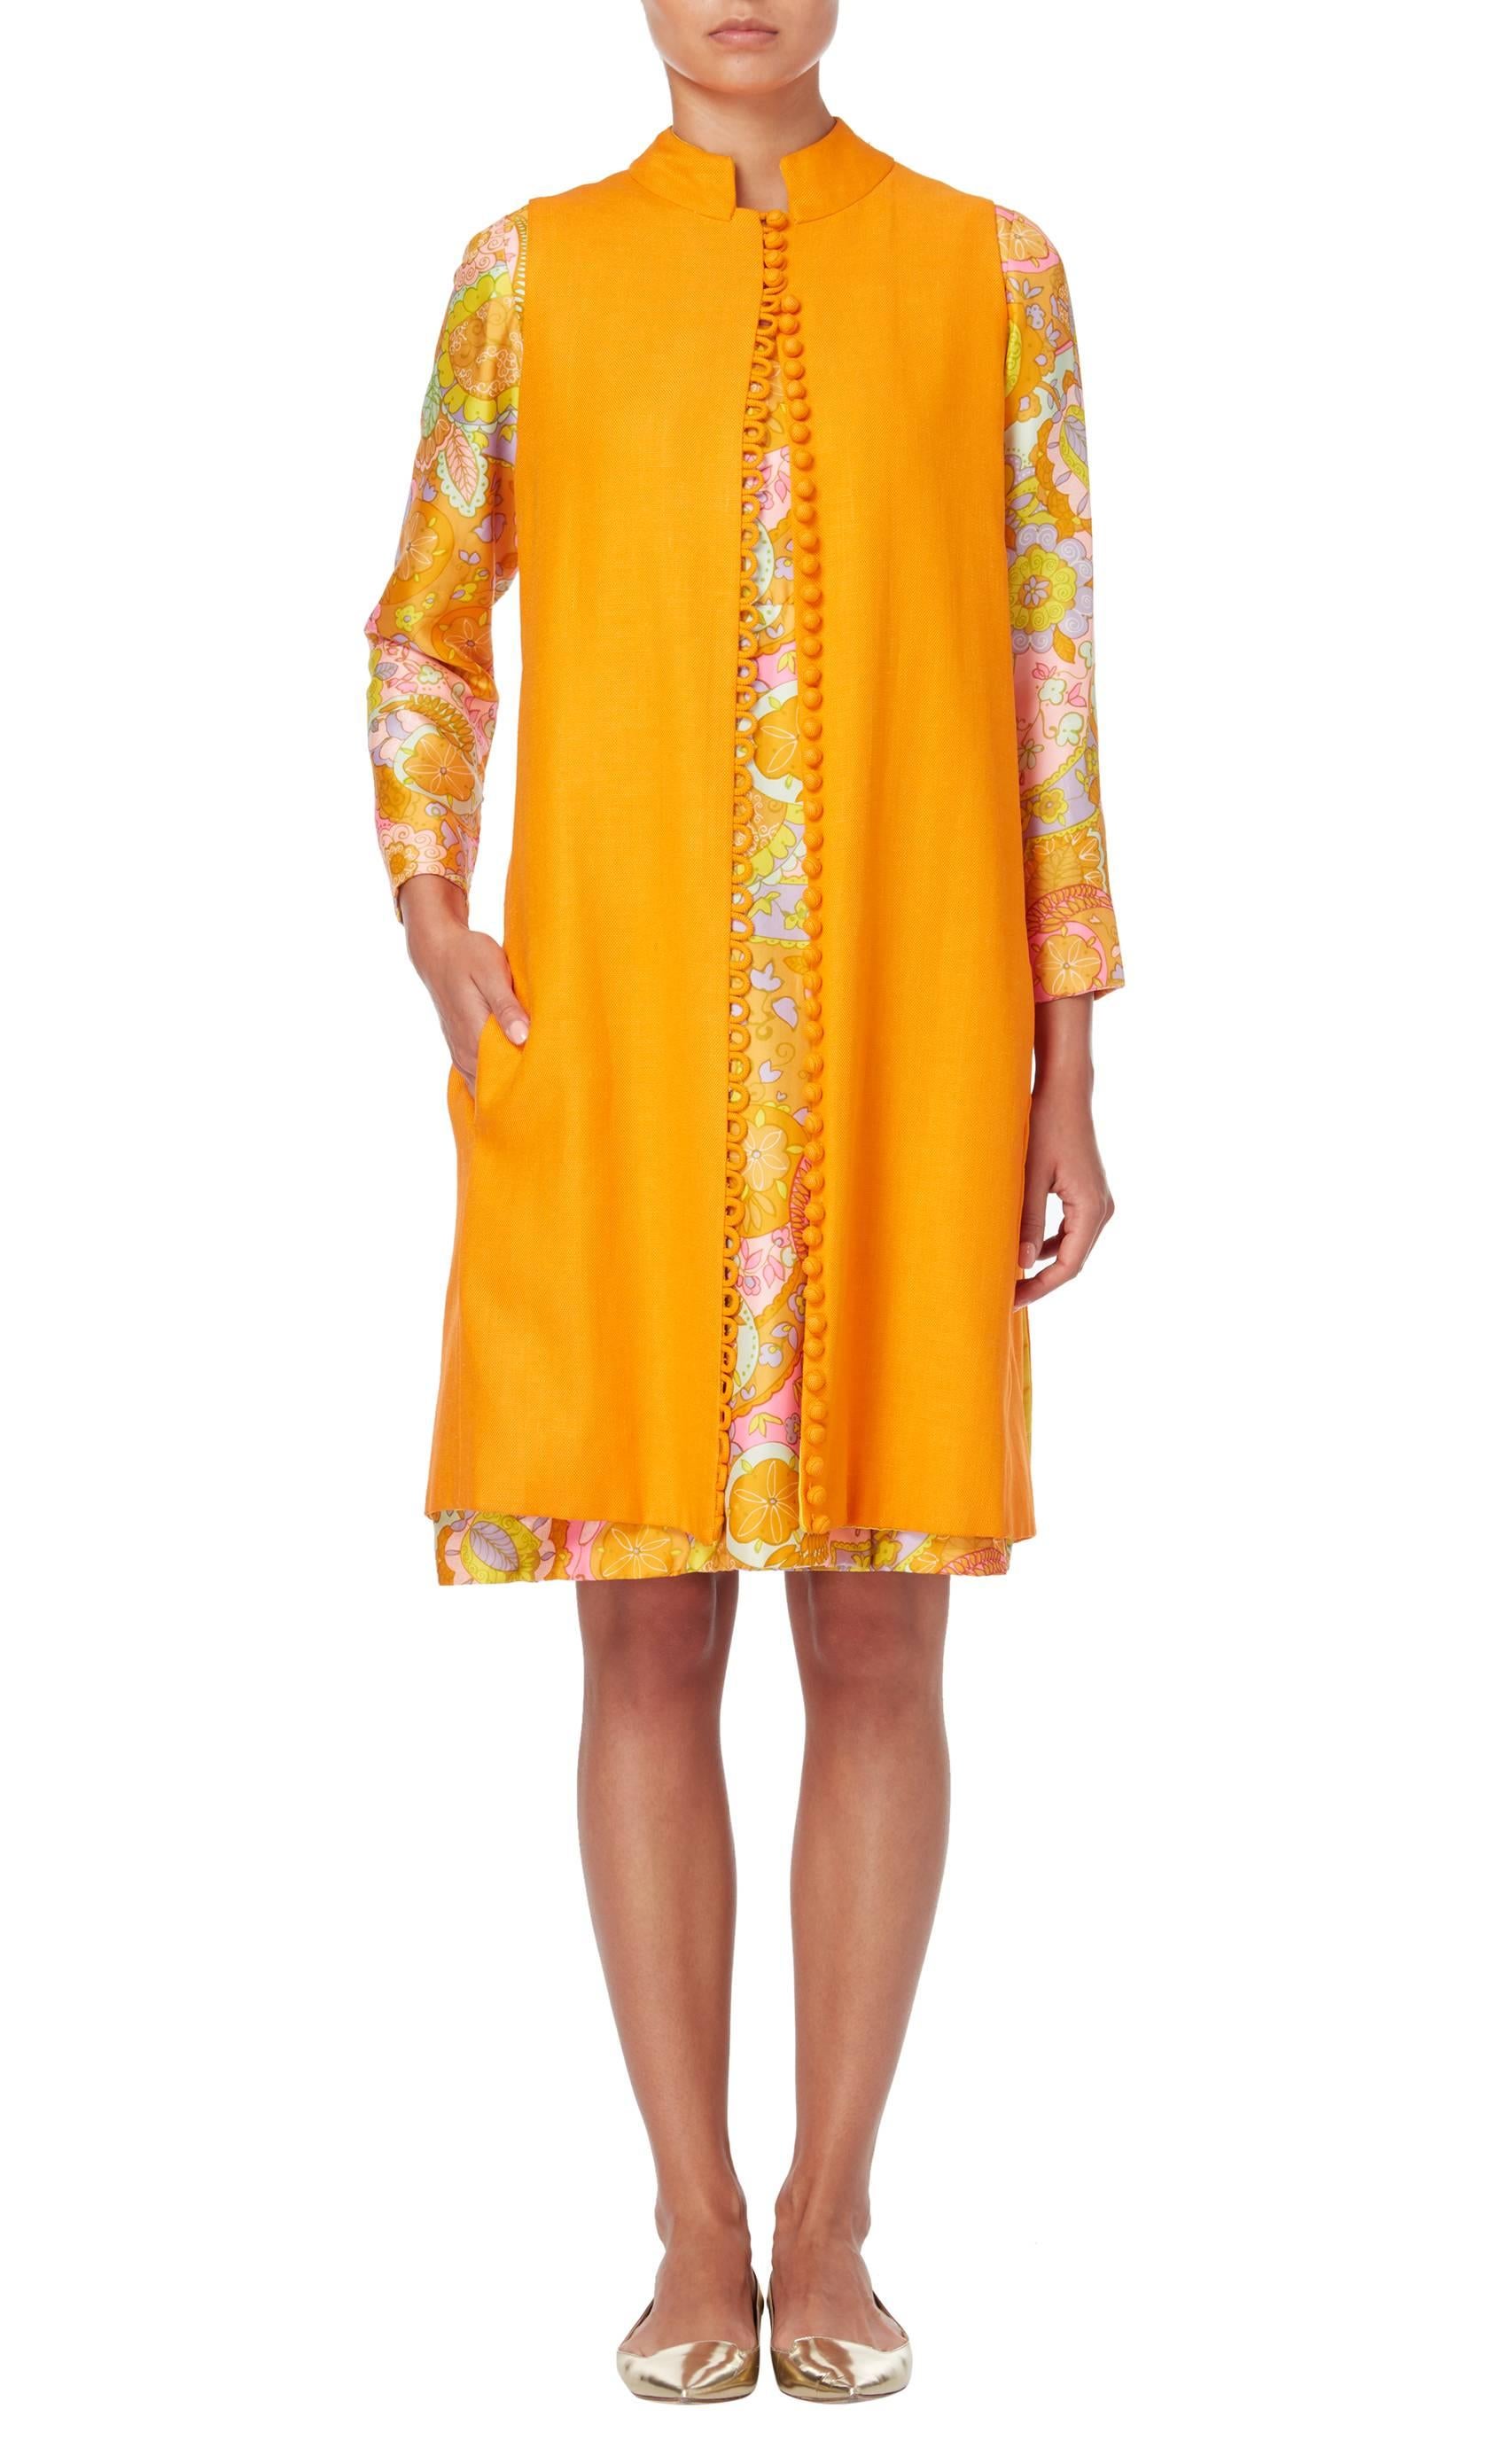 Dress and tunic ensemble by Tina Leser, circa 1973. The ensemble comprises of a floral printed dress, featuring an all-over multi-coloured floral print and an orange tunic with mandarin collar.				